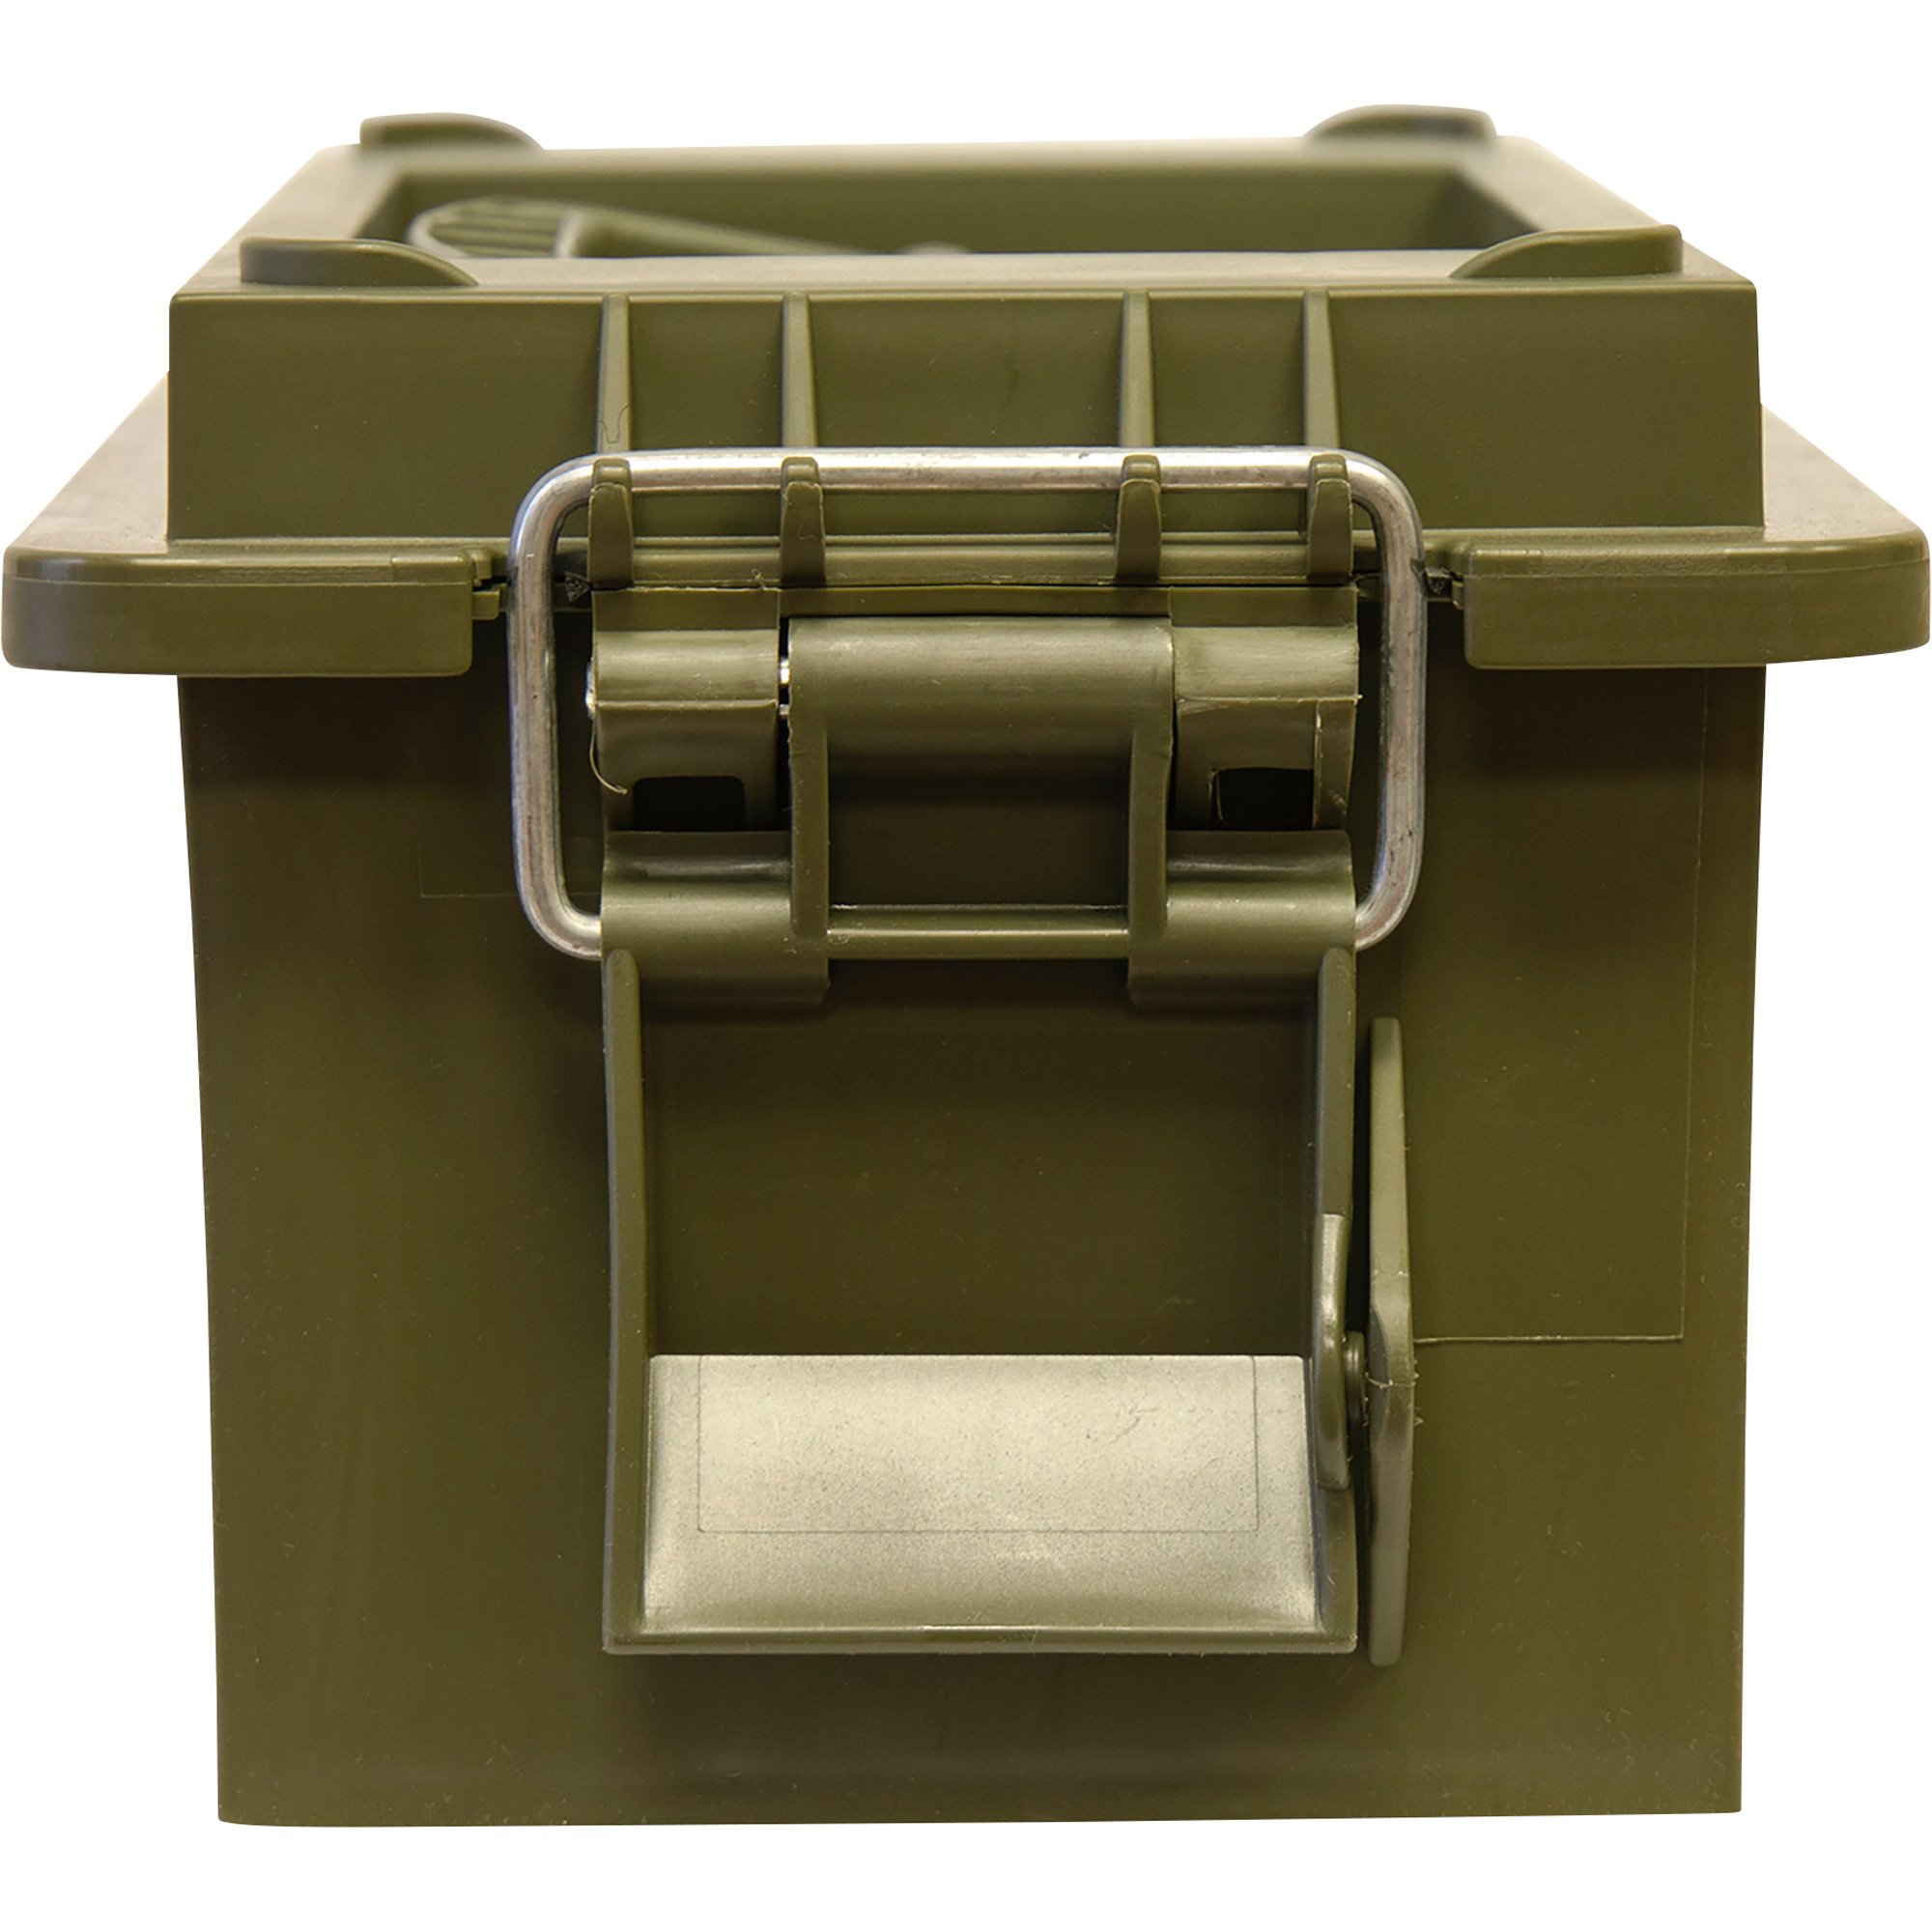 Wise Small Utility Dry Box — Olive Green, Model# 56021-13